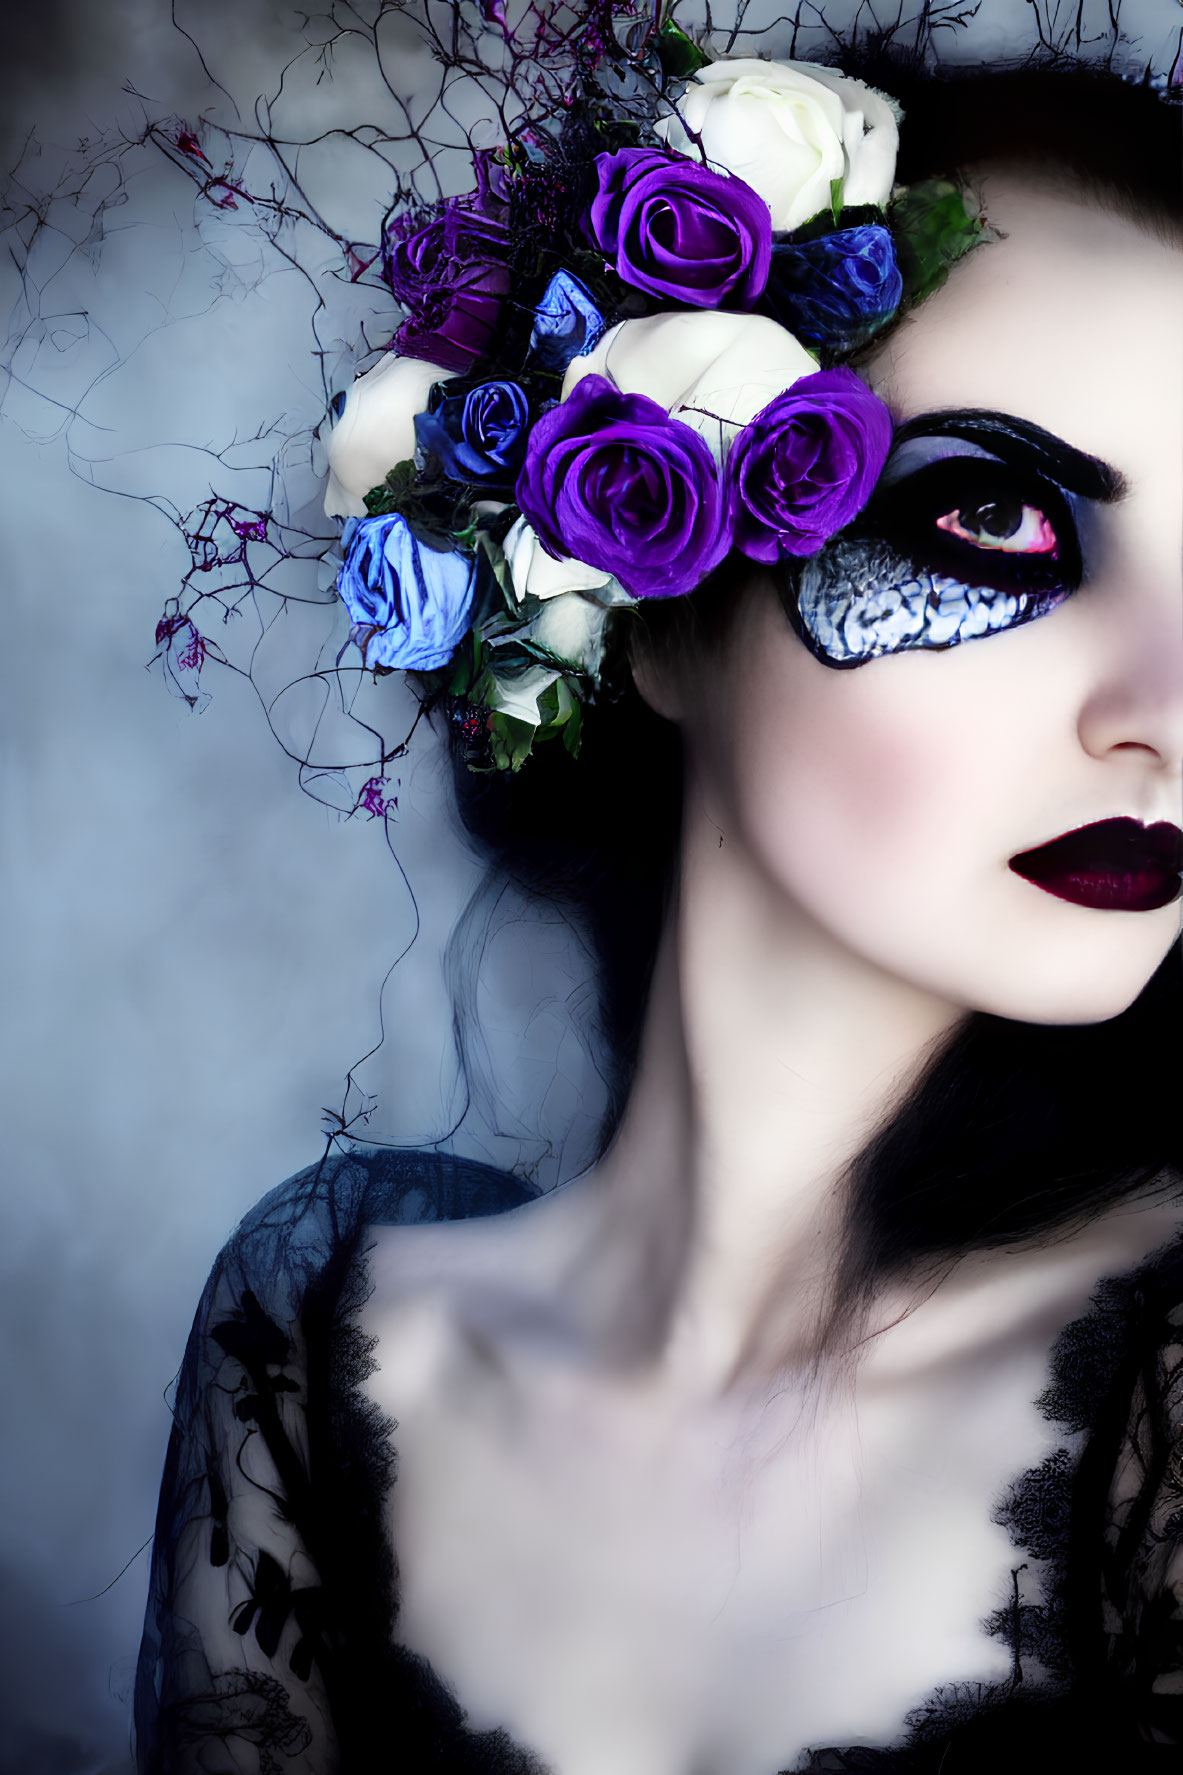 Woman with dramatic black eye mask, dark lipstick, blue and purple rose headpiece on cold-toned